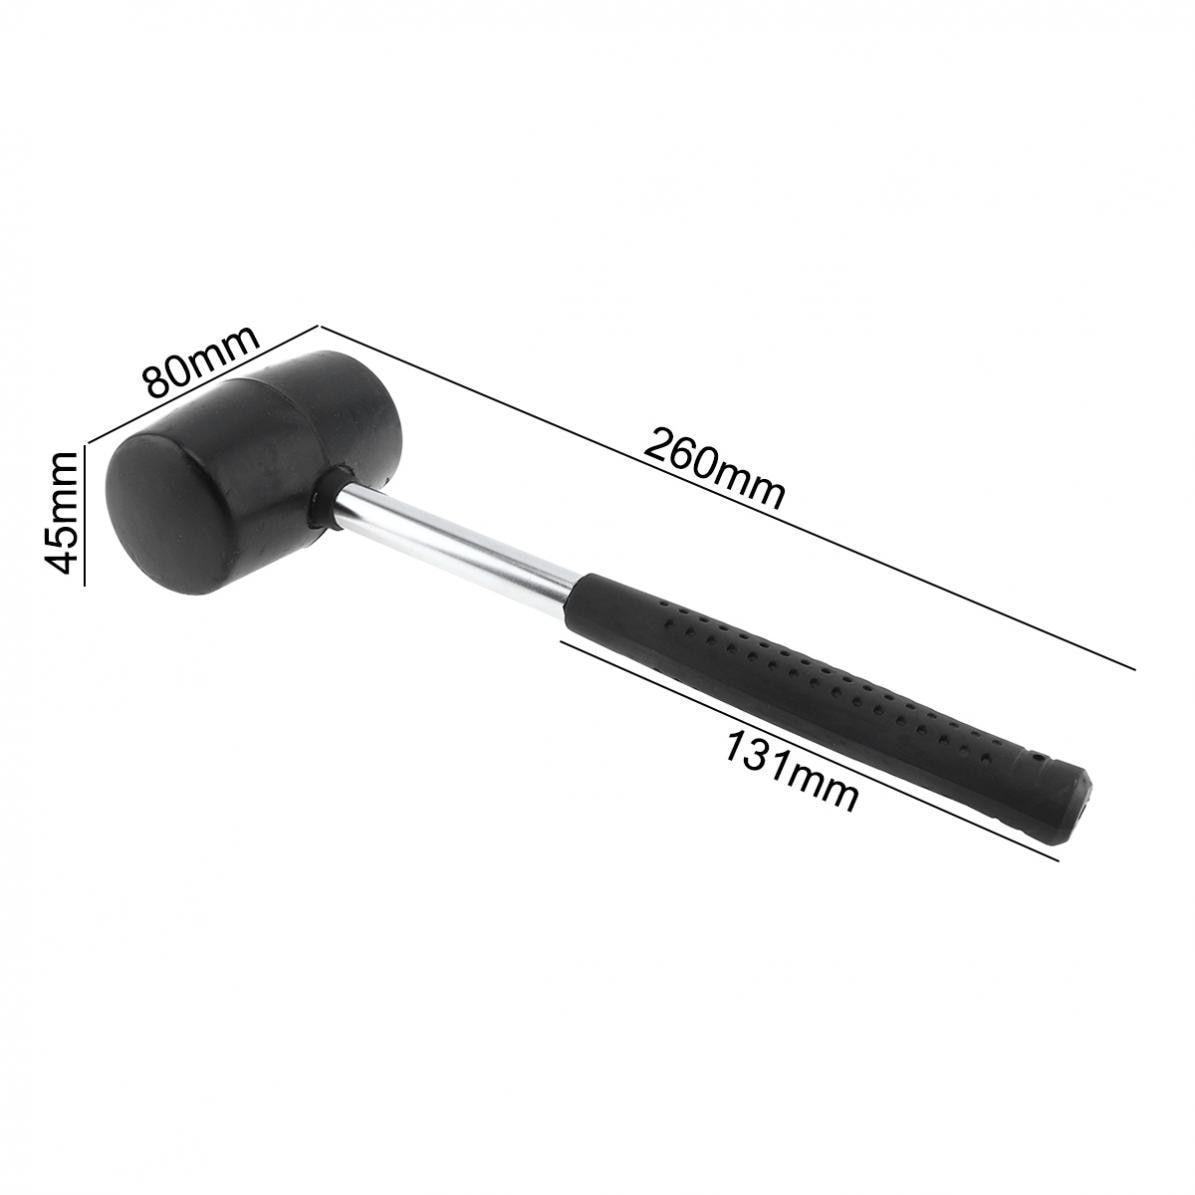 Non-elastic Black Rubber Hammer Wear-resistant Tile Hammer with Round Head and Non-slip Handle DIY Hand Tool